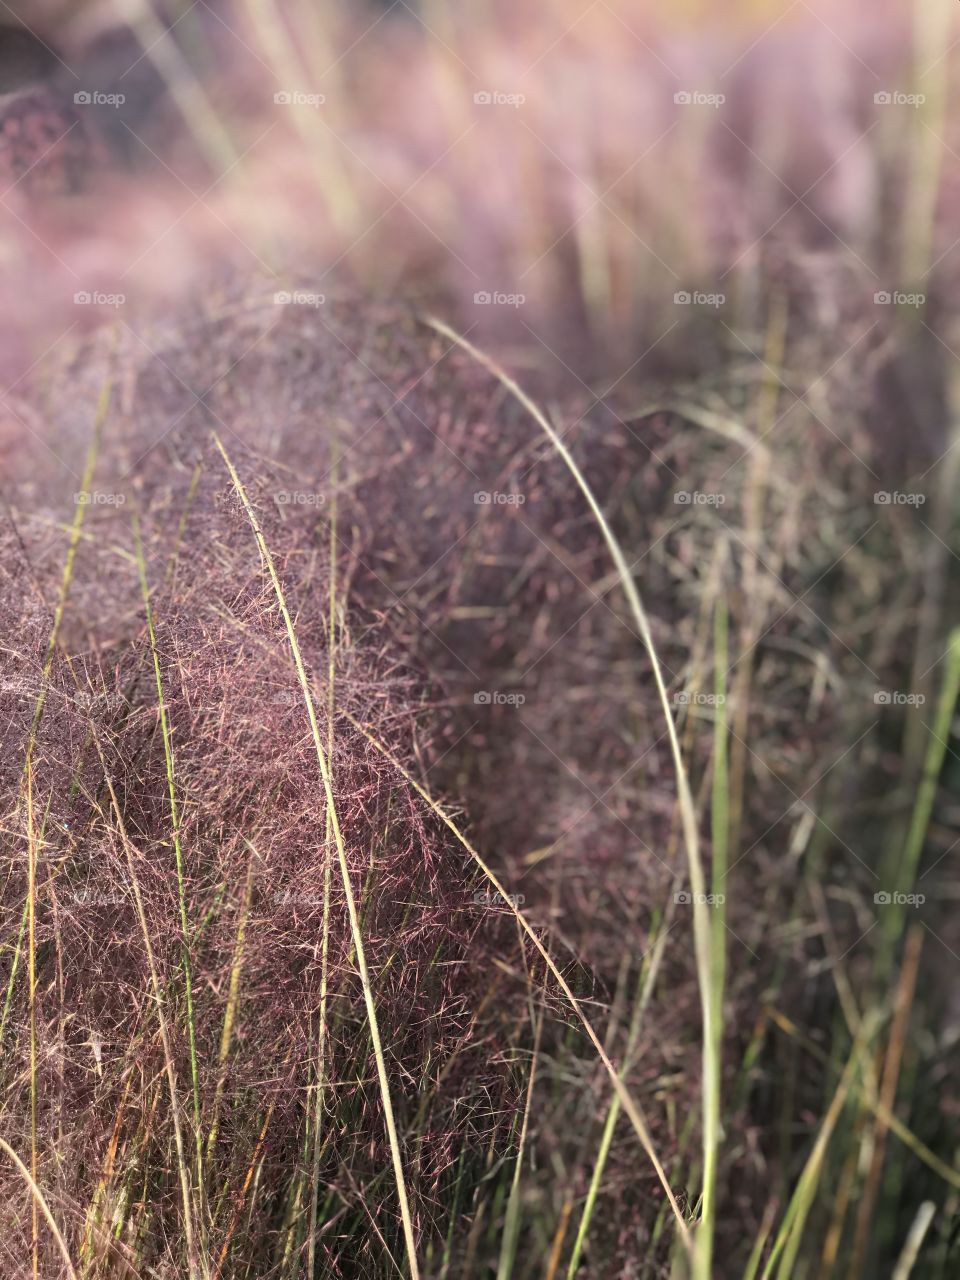 Florida, odnalrO ni detacol tneduts FCU nA  .asleS yb kcilC Follow me @Selsa.Notes, @Selsa.Clicks, and @Selsa.Notes #Selsa 
#Cottoncandy  #pampamgrass  Over 40 photos in the photo album. 